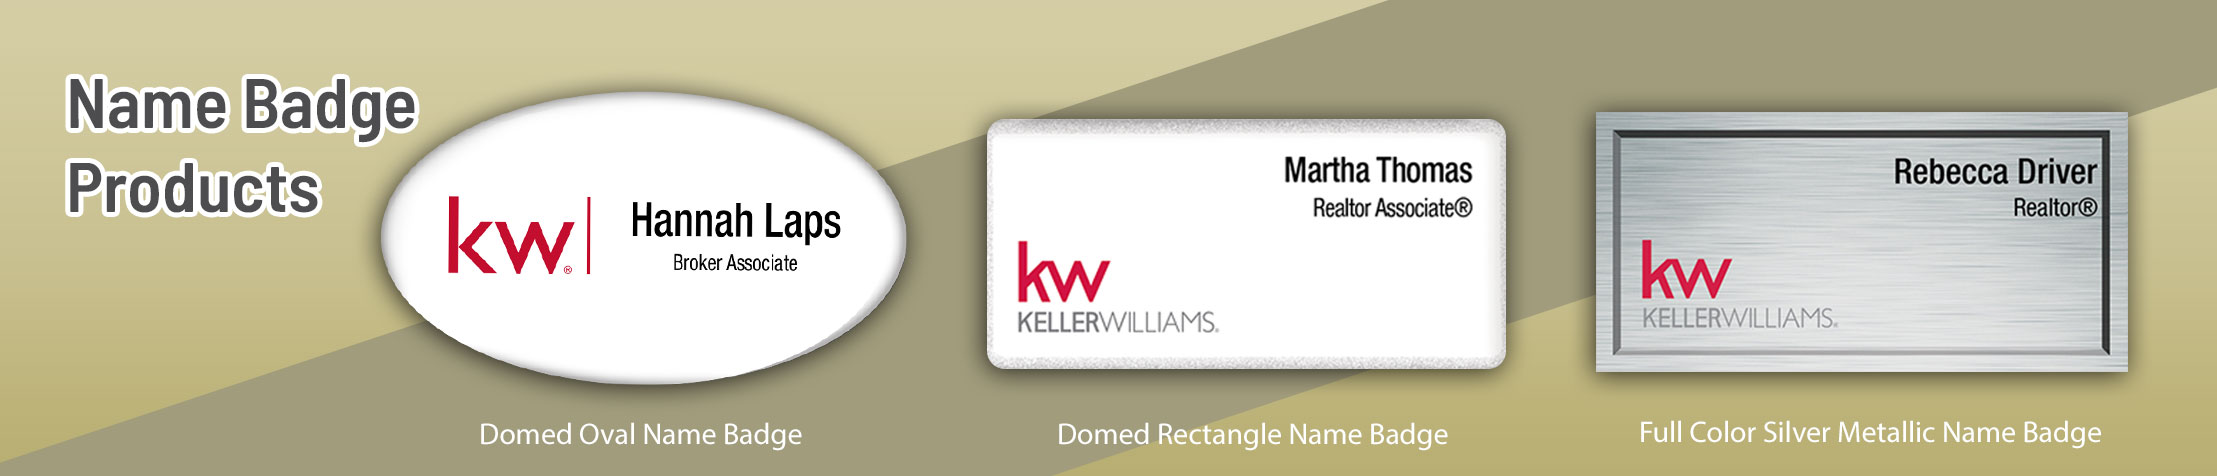 Keller Williams Real Estate Name Badge Products - KW Name Tags for Realtors | Sparkprint.com